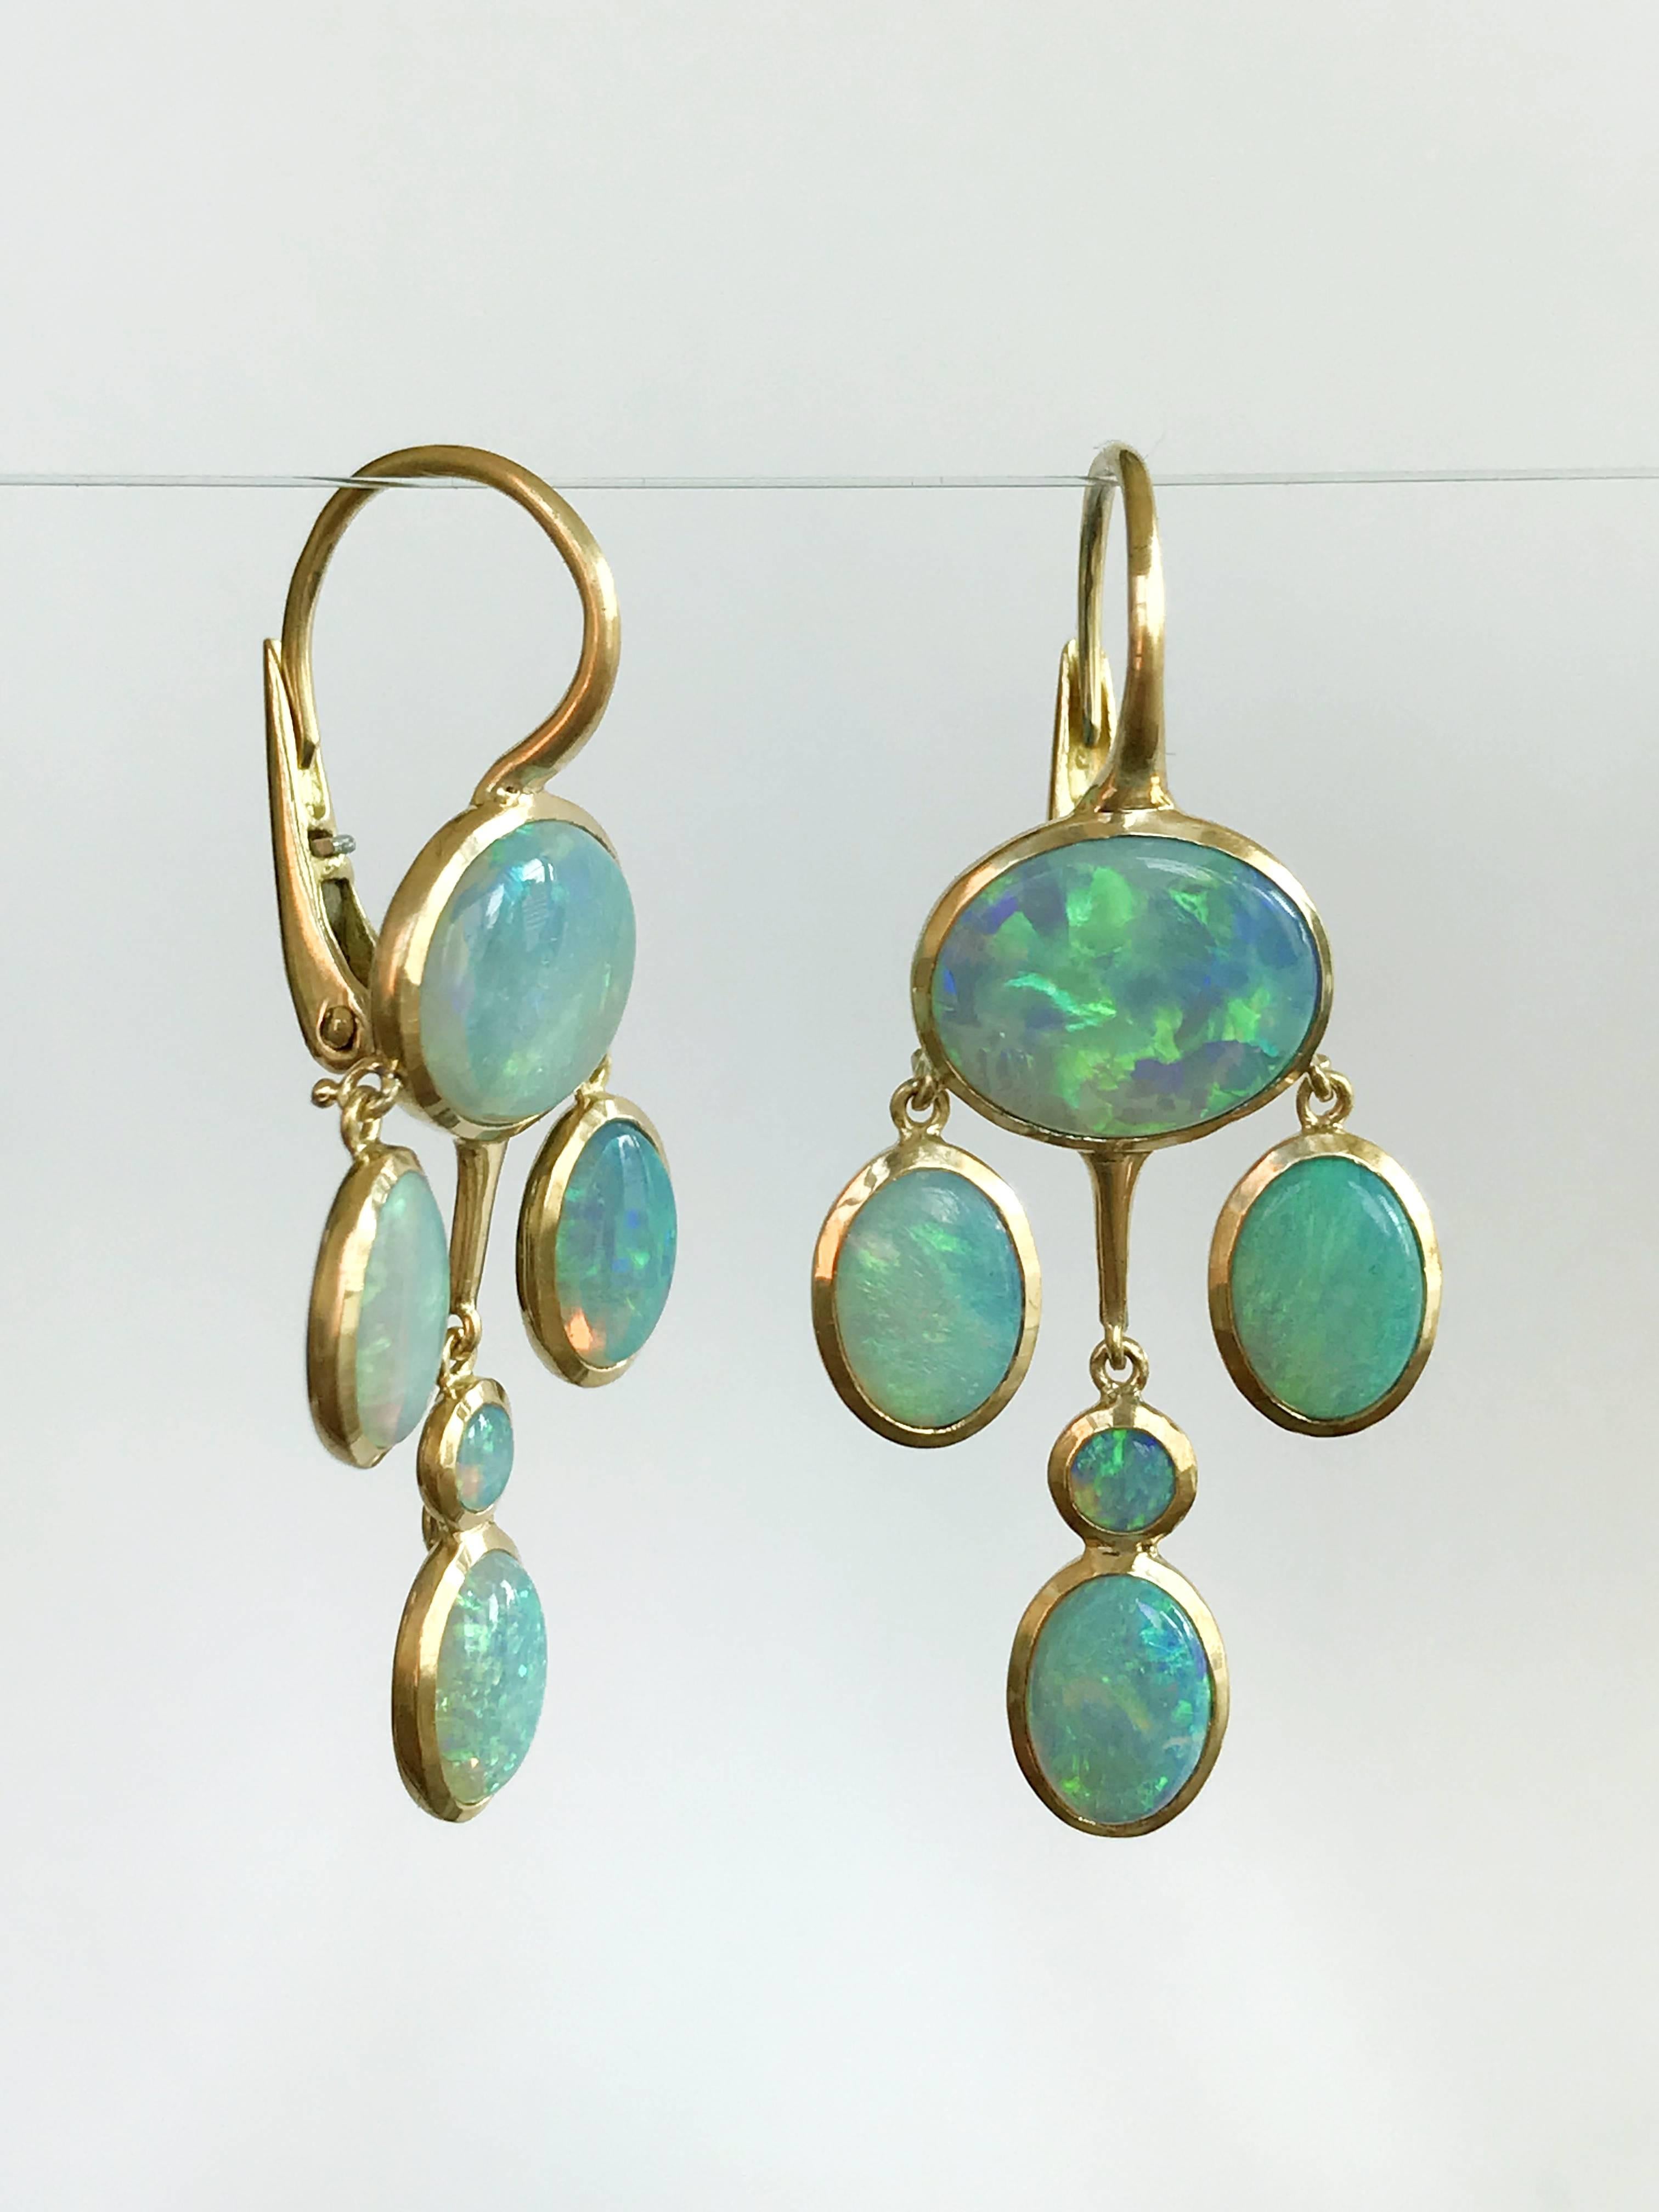 Dalben design 18k yellow gold semi lucid finishing earrings with 10 bezel set Australian Opals .  
Dimension:  
max width 16 mm , 
height without leverback 28 mm  
height with leverback 37 mm 
The earrings has been designed and handcrafted in our